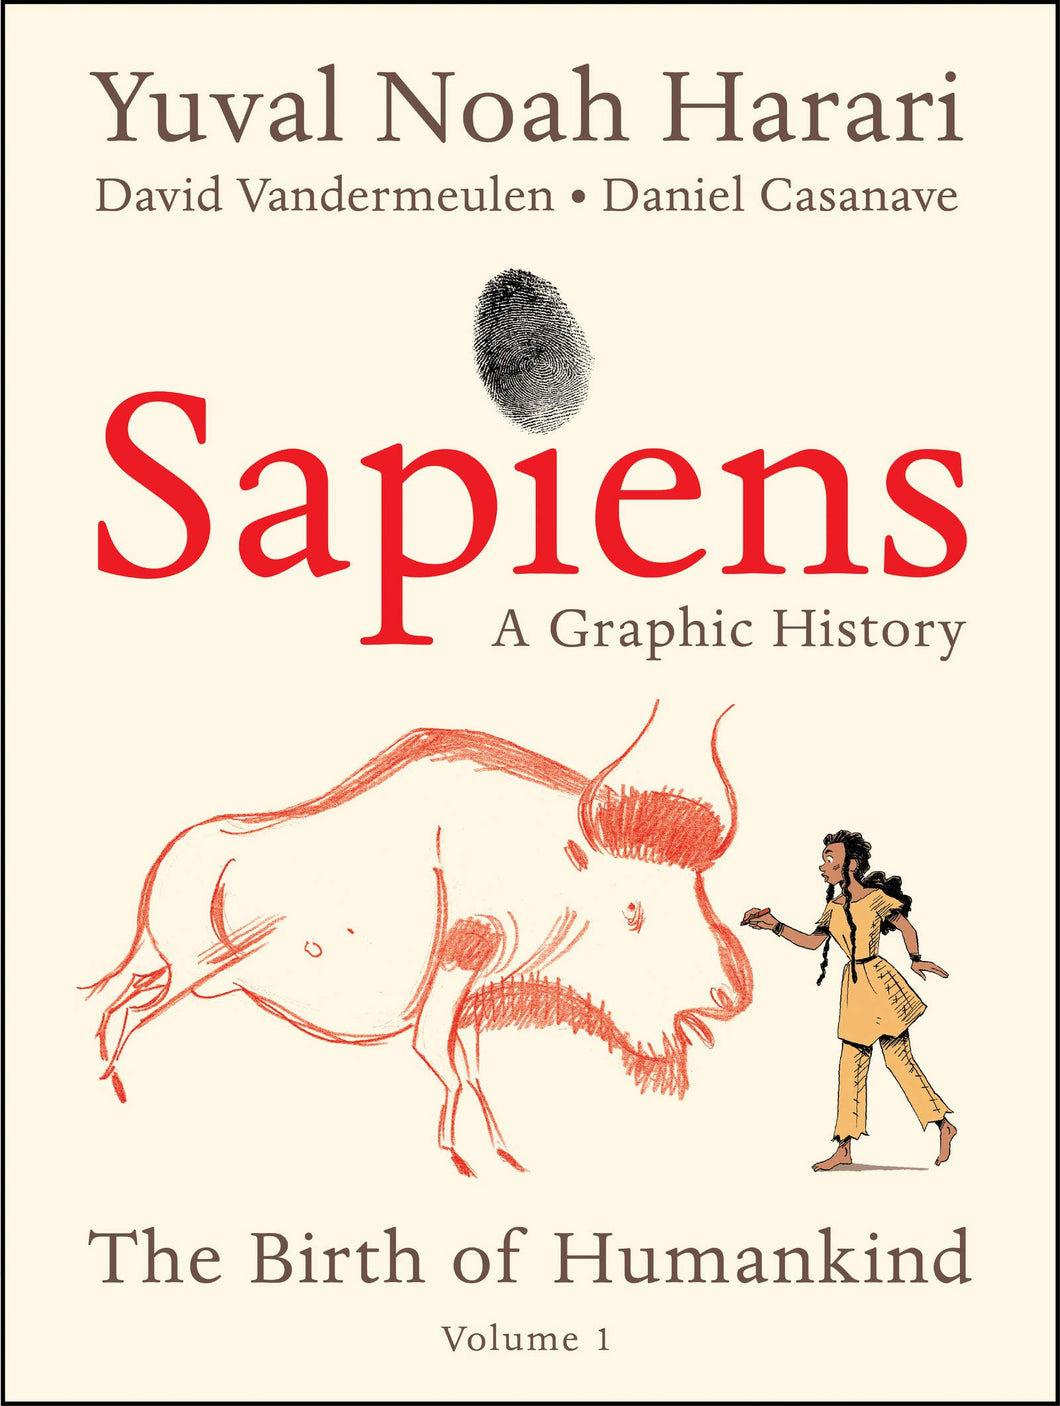 Sapiens: A Graphic History Volume 1: The Birth of Humankind